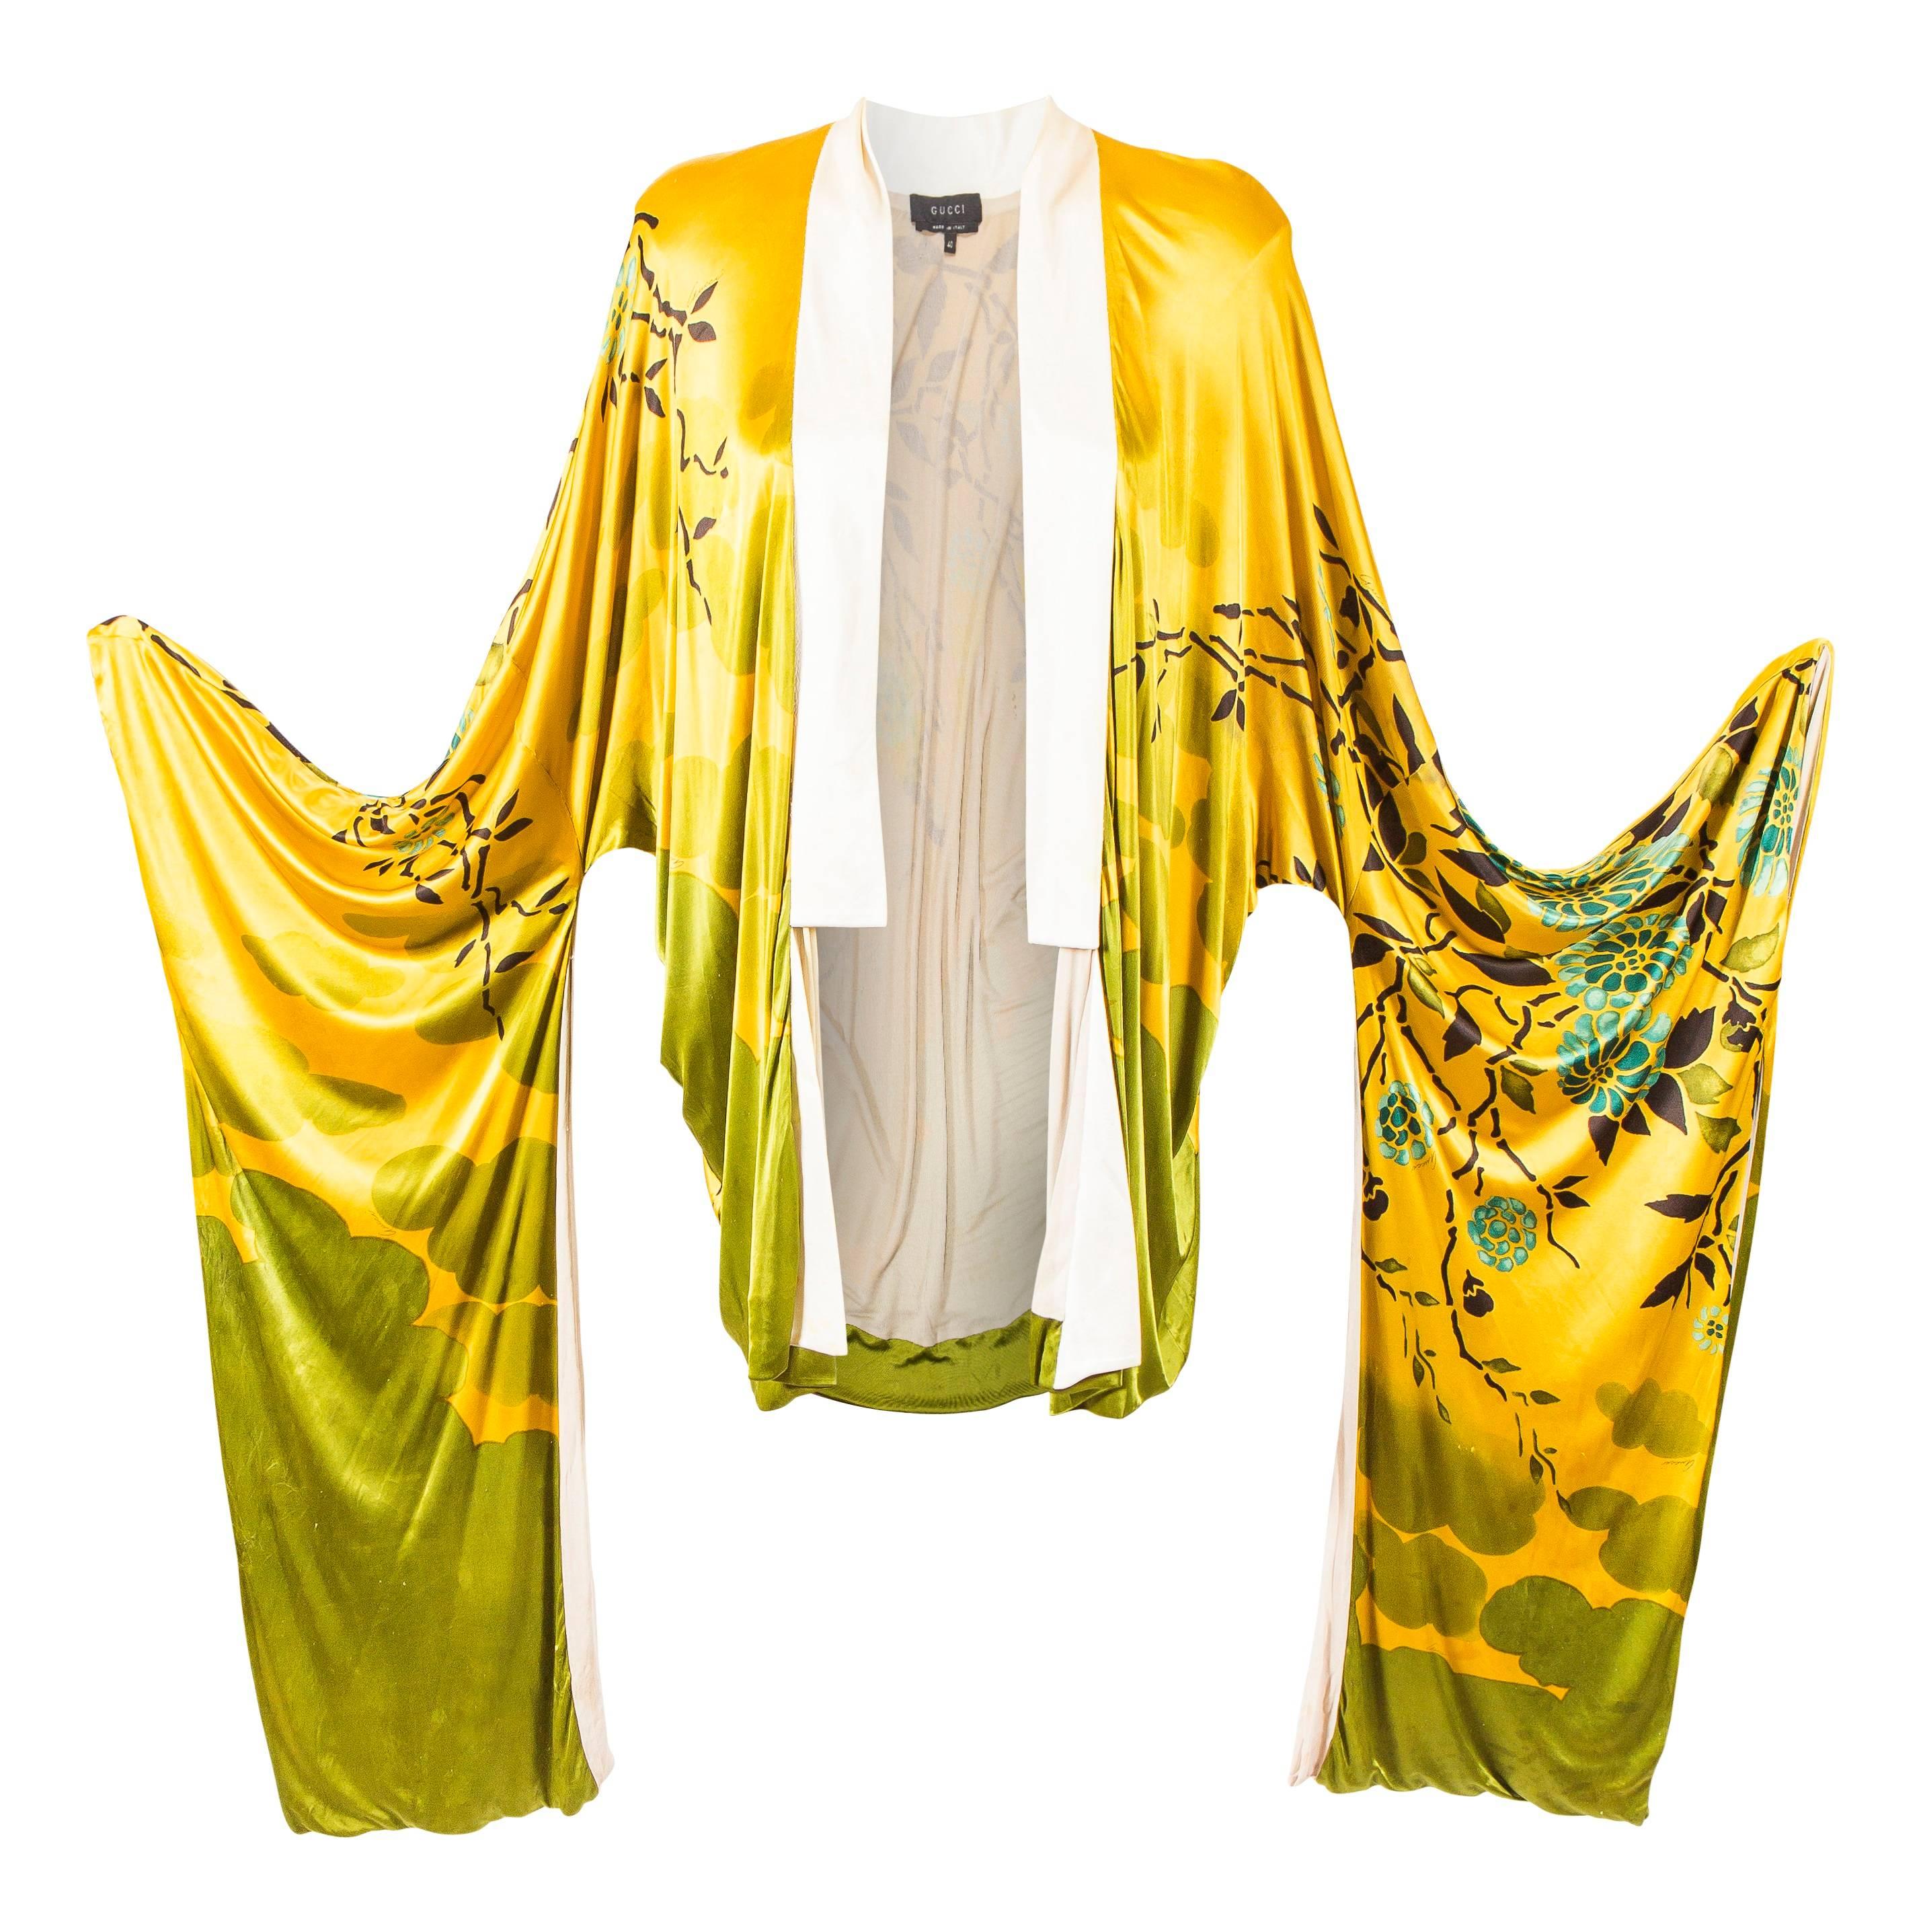 Tom Ford for Gucci Spring 2003 
Iconic Yellow Kimono 
Features in Campaign Ad
Only a few made worldwide 
Highly collectable
Silk Jersey, some colour run and wear consistent with age.